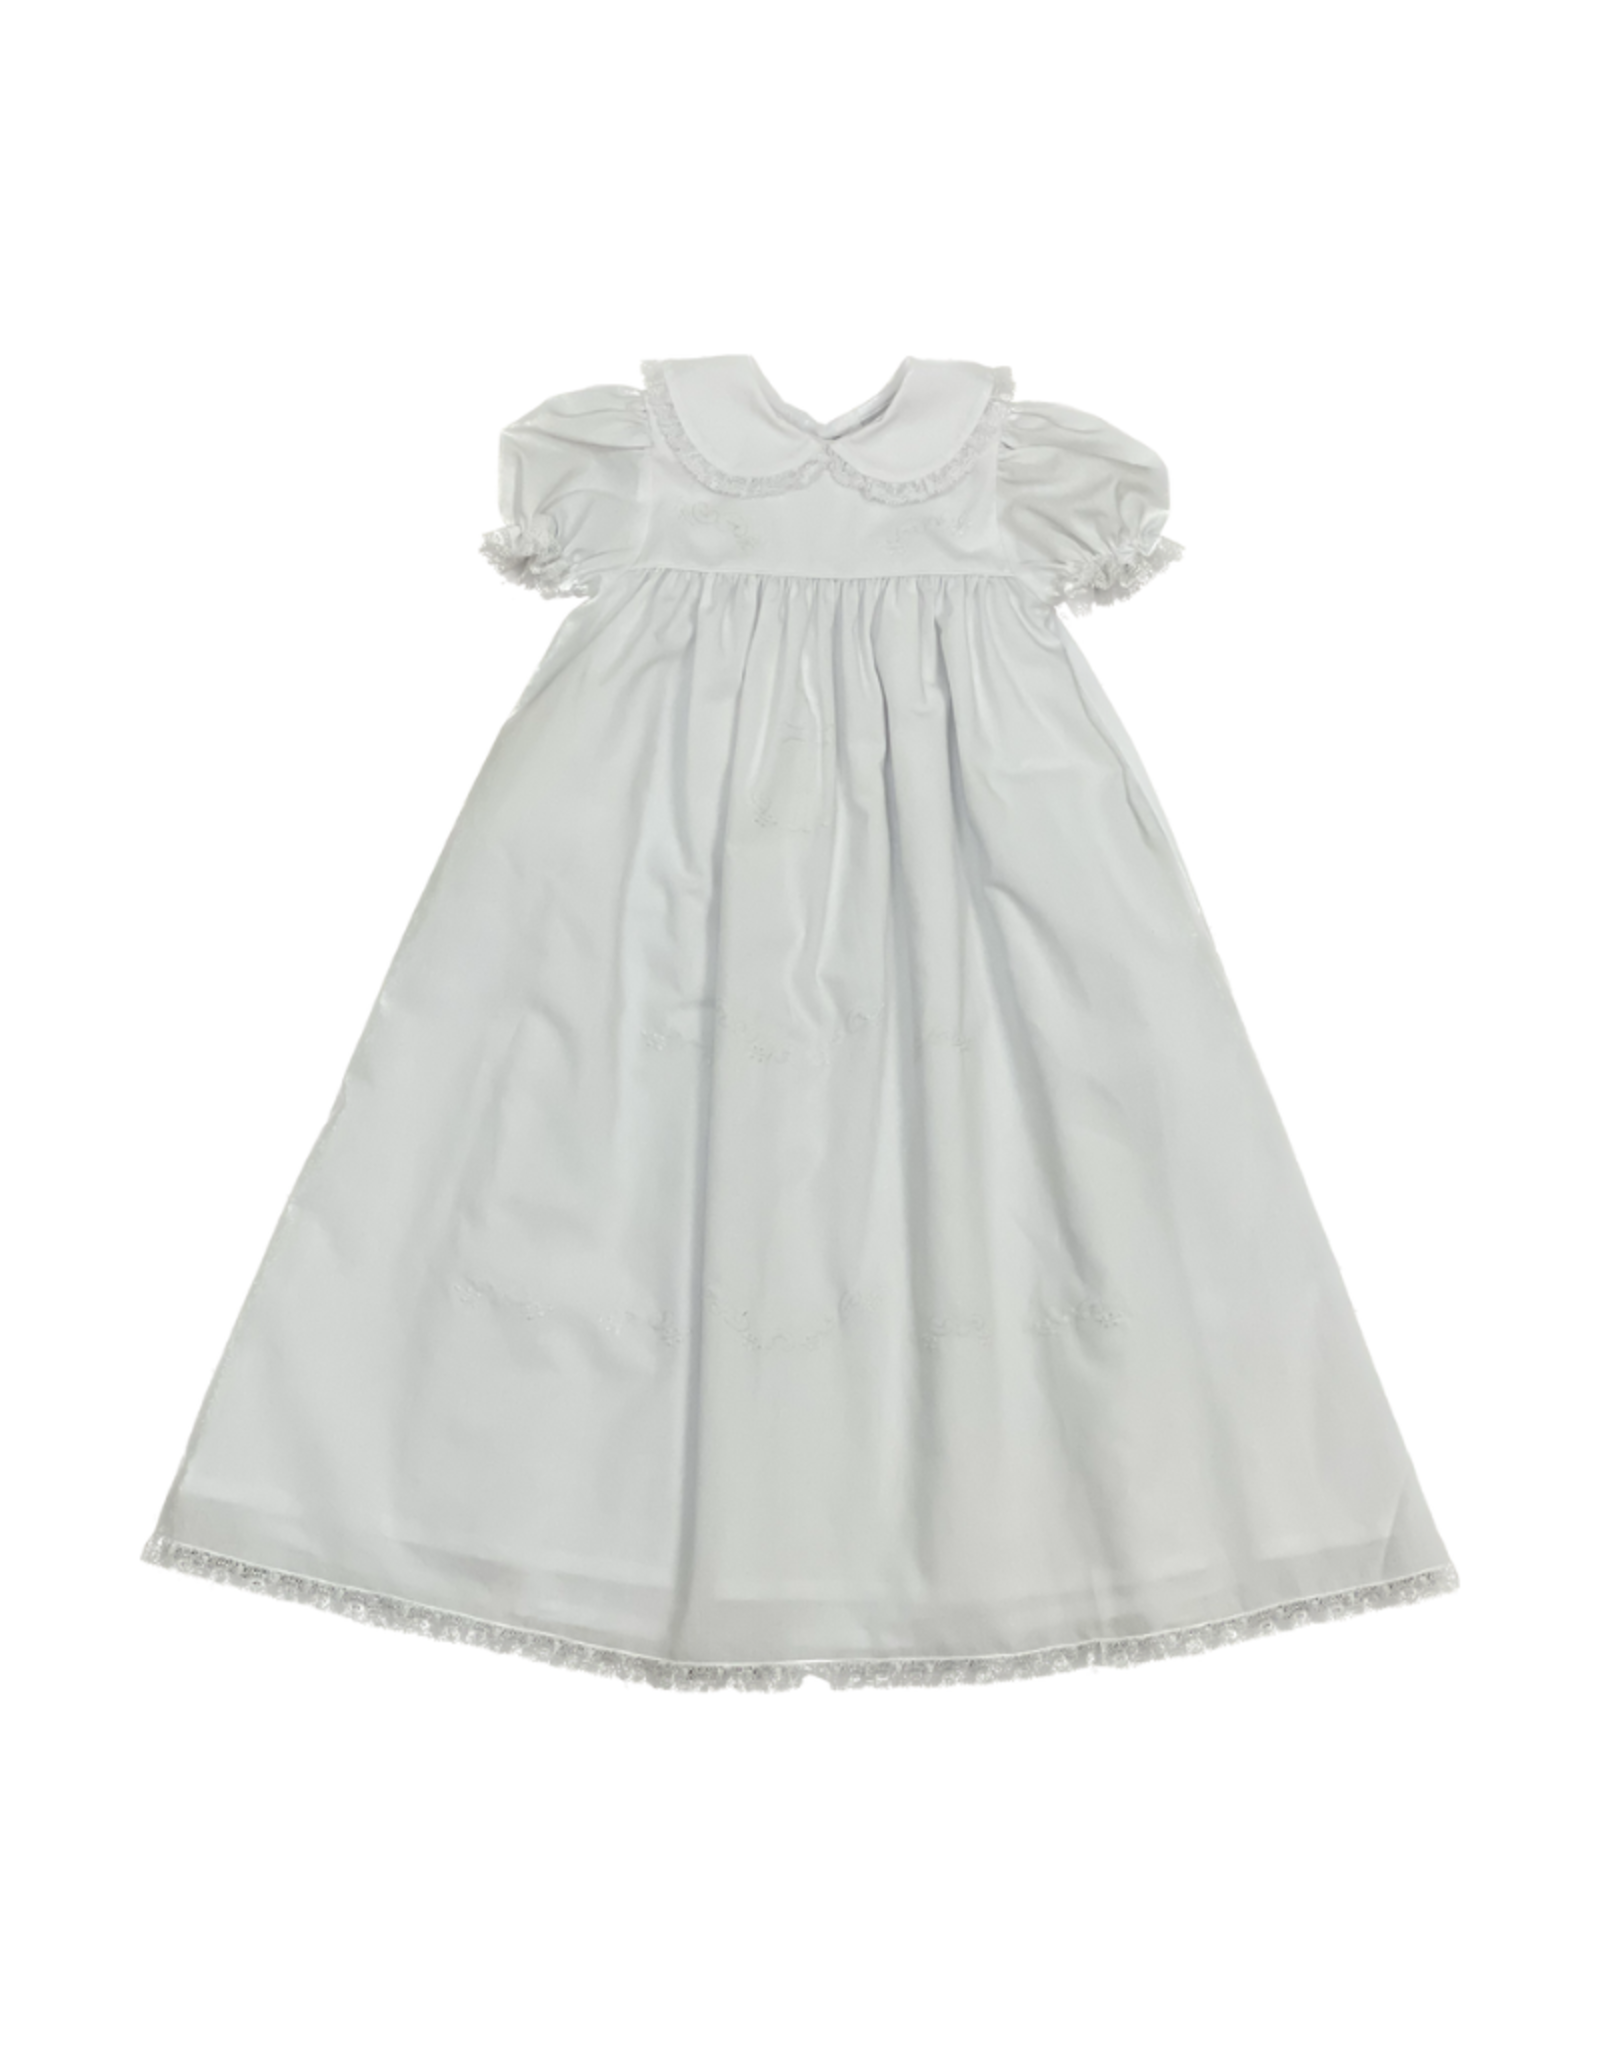 Auraluz White Cross Christening Gown with Lace